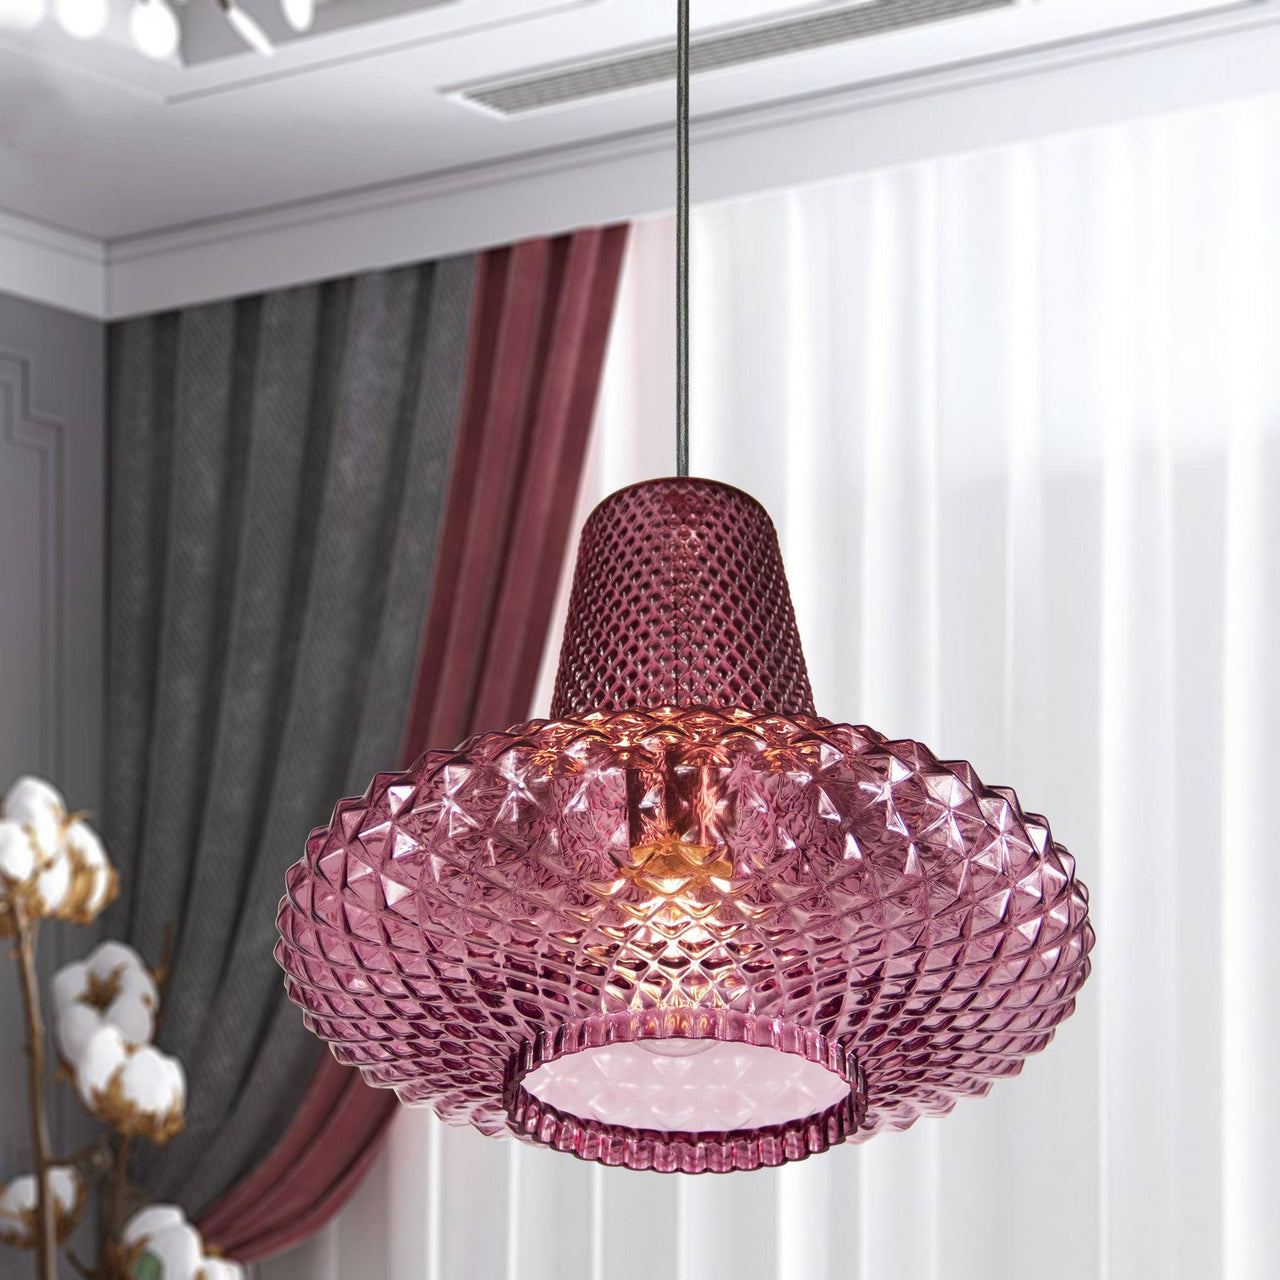 Jarvis Vintage Pendant Light Fixture with Pink Glass Shade, Home Decor, Overhead Ceiling Lighting for Foyer, Living or Dining Room, or Reading Nook Pendant Lighting Canyon Home 